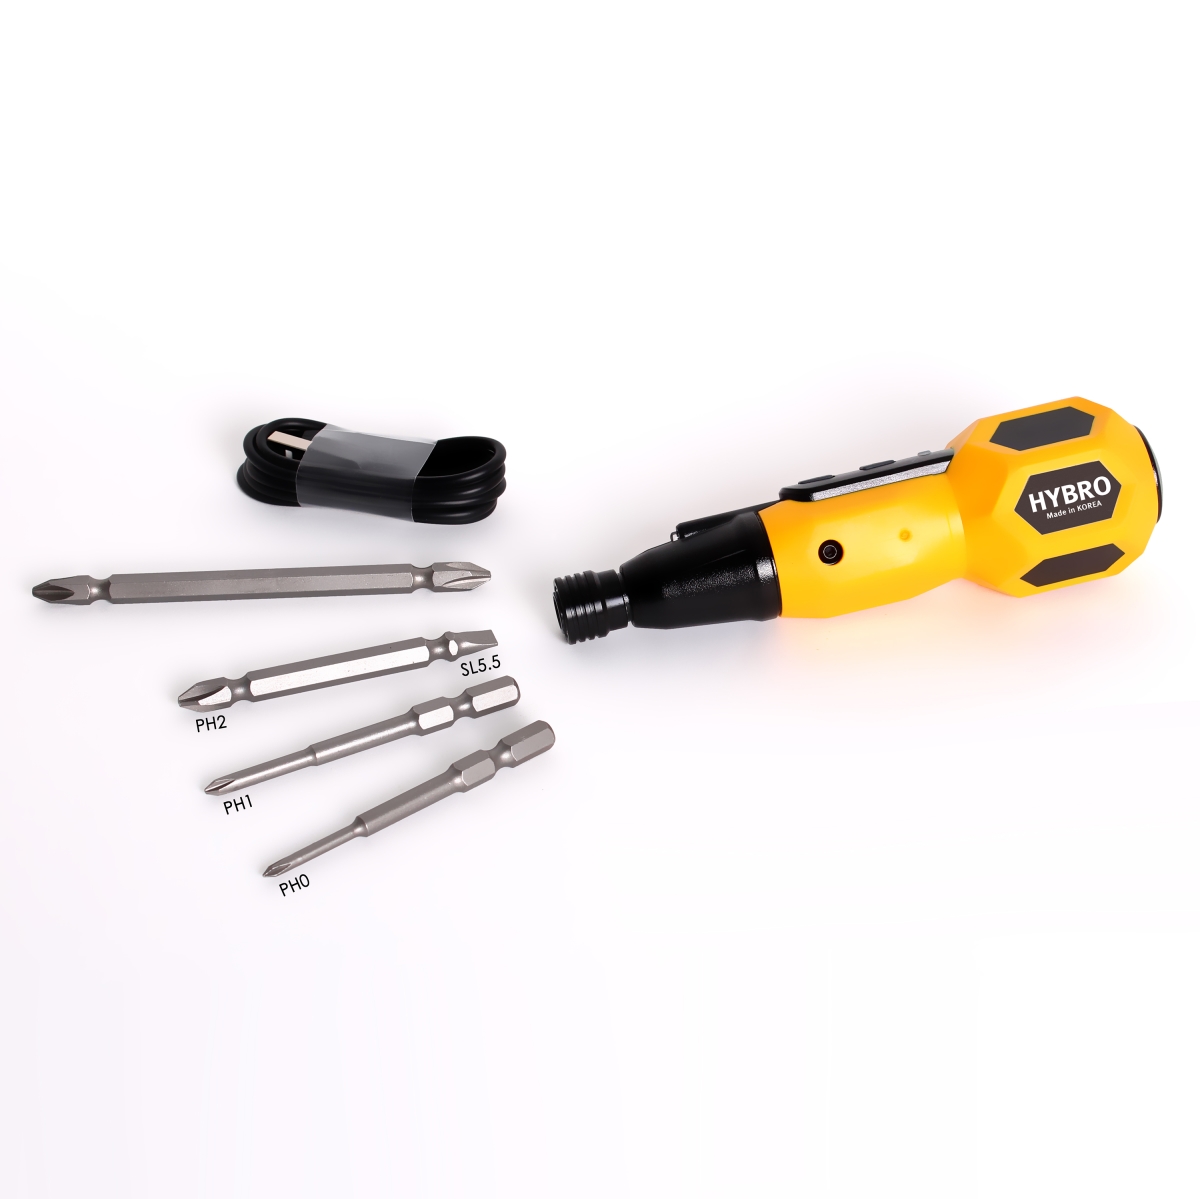 Hiv-004y Electric & Manual Duo Usb Rechargeable Screw Driver With Four Bits, Yellow